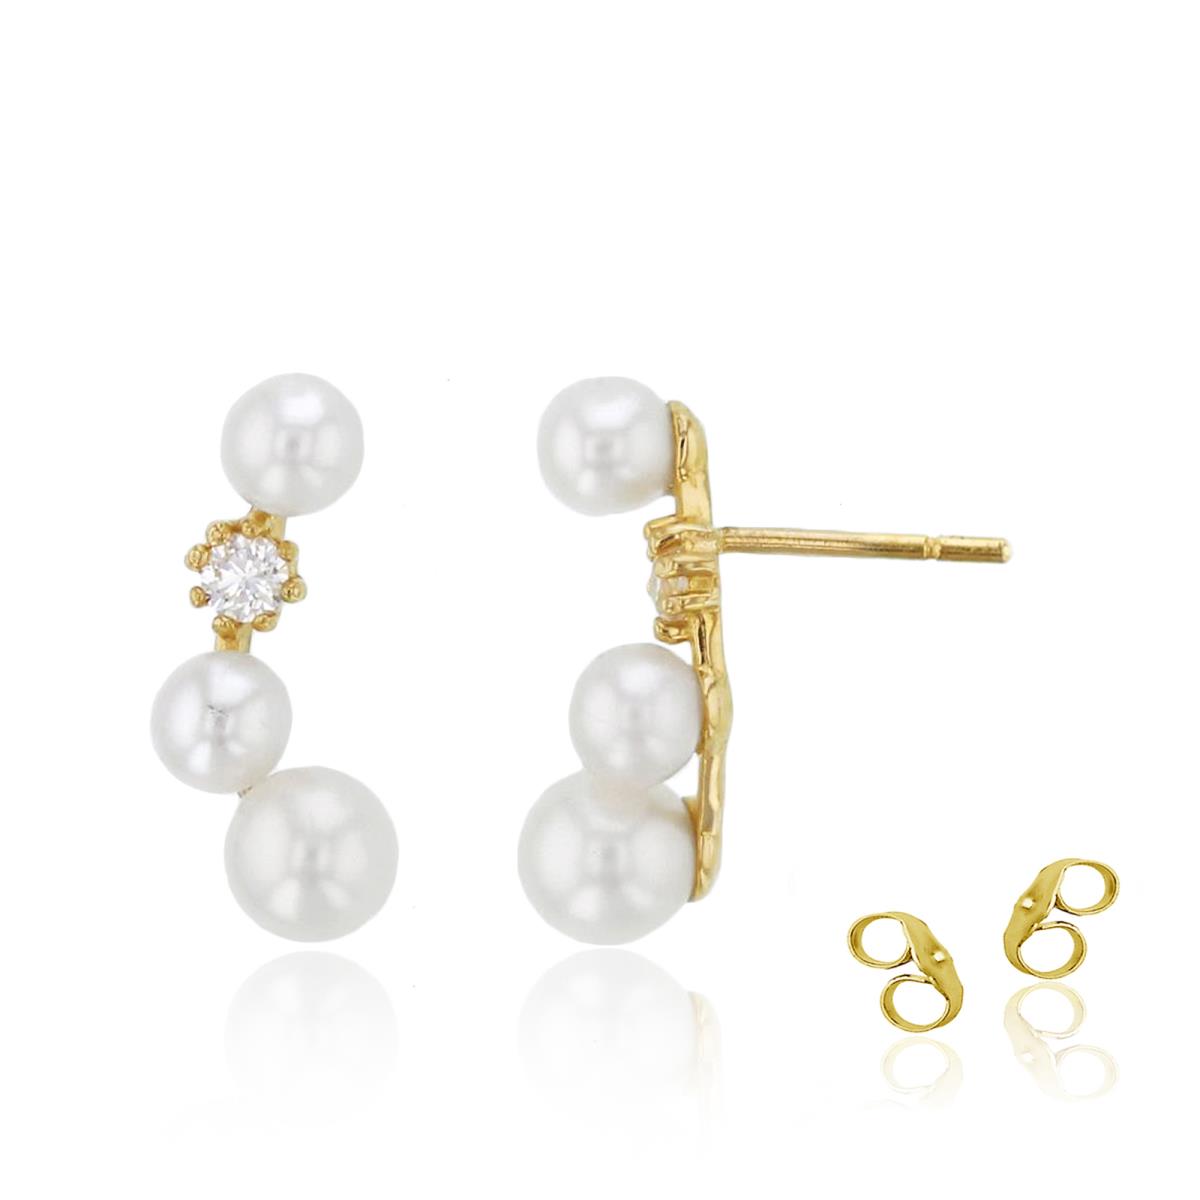 14K Yellow Gold Rnd CZ & 3mm/4mm Fresh Water Pearl Crawl Earrings with 4.5mm Clutch